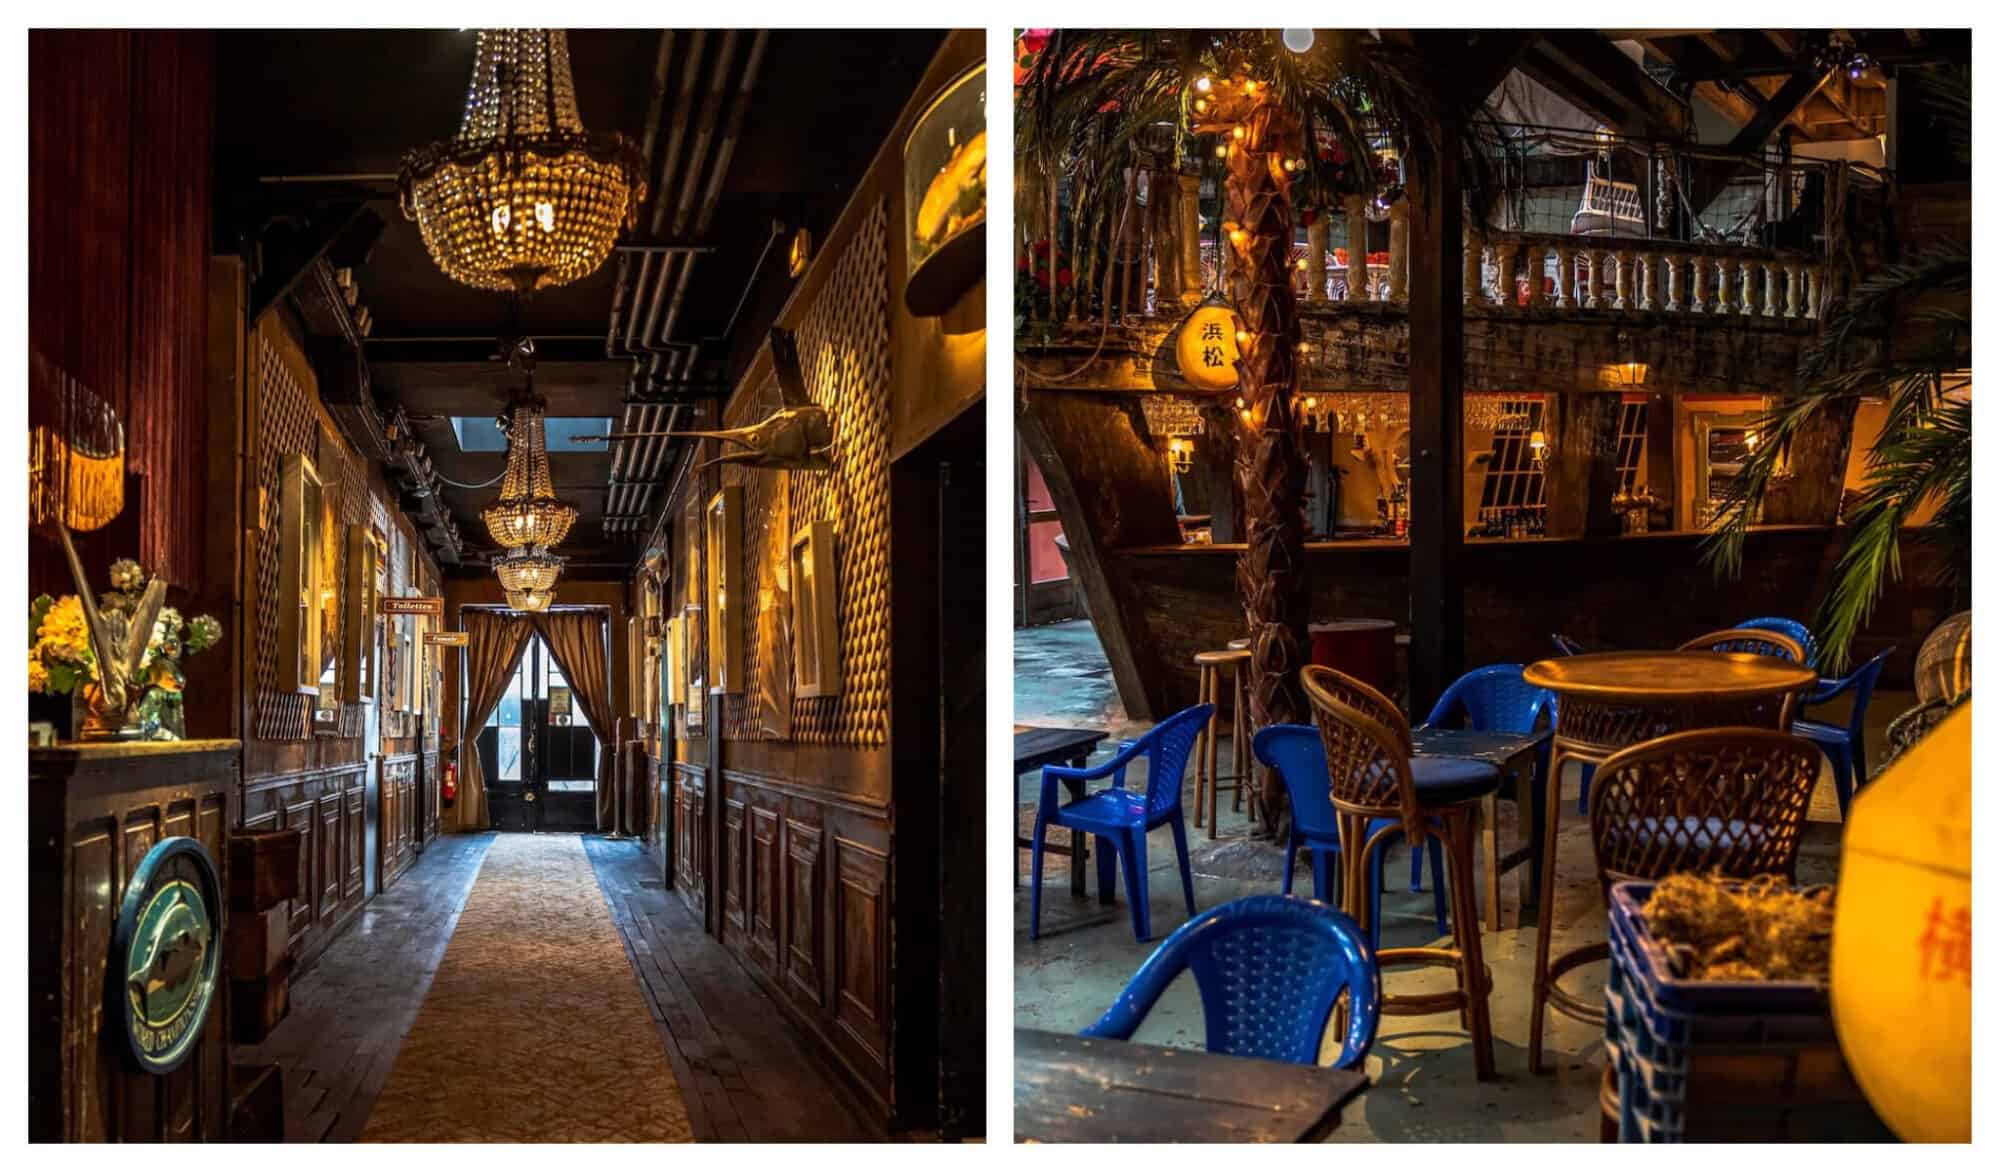 Right: A view down a hallway in Le Comptoire General. The interior is dark and there are chandeliers that illuminate the hallway, a thin carpet stretching down it. There is a window with curtains drawn at the end of the hallway. Right: A view inside Le Comptoire General's cafe. Blue wicker chairs surround wooden tables, intermingled by the same wicker chairs in brown. The bar is in the center and there are palms.